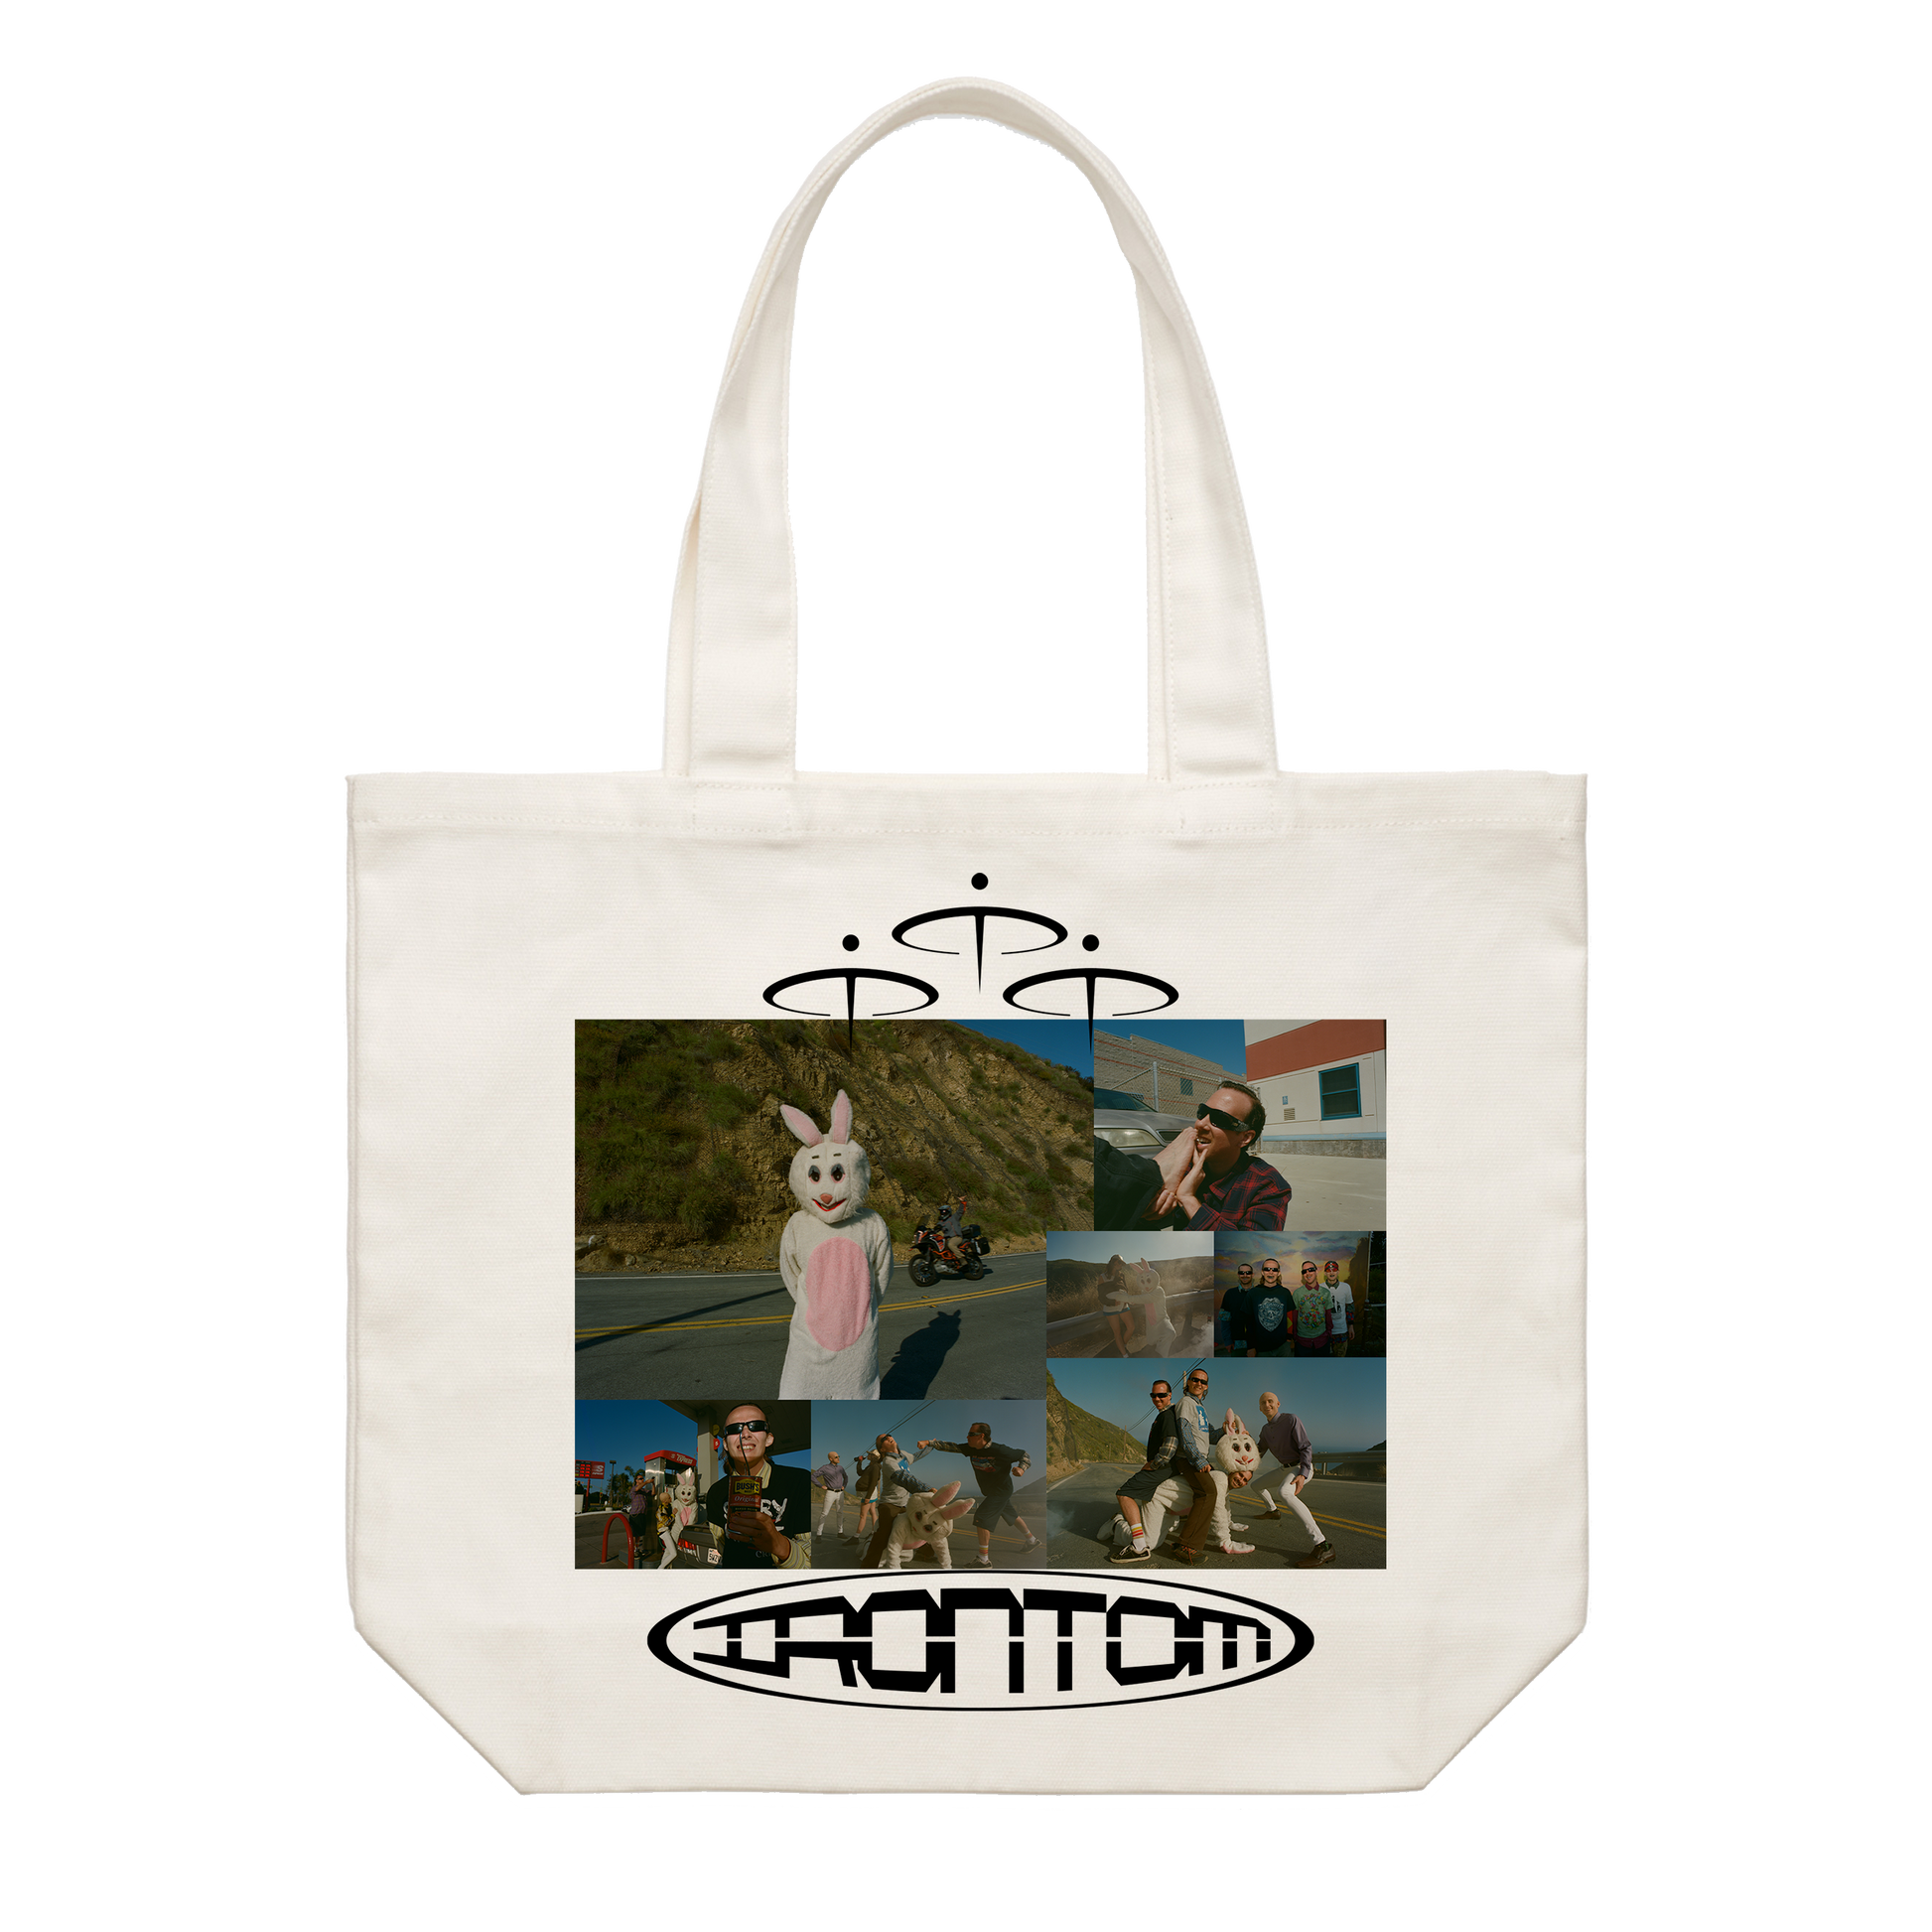 IRONTOM Natural Color Canvas Tote printed with imagery on one side